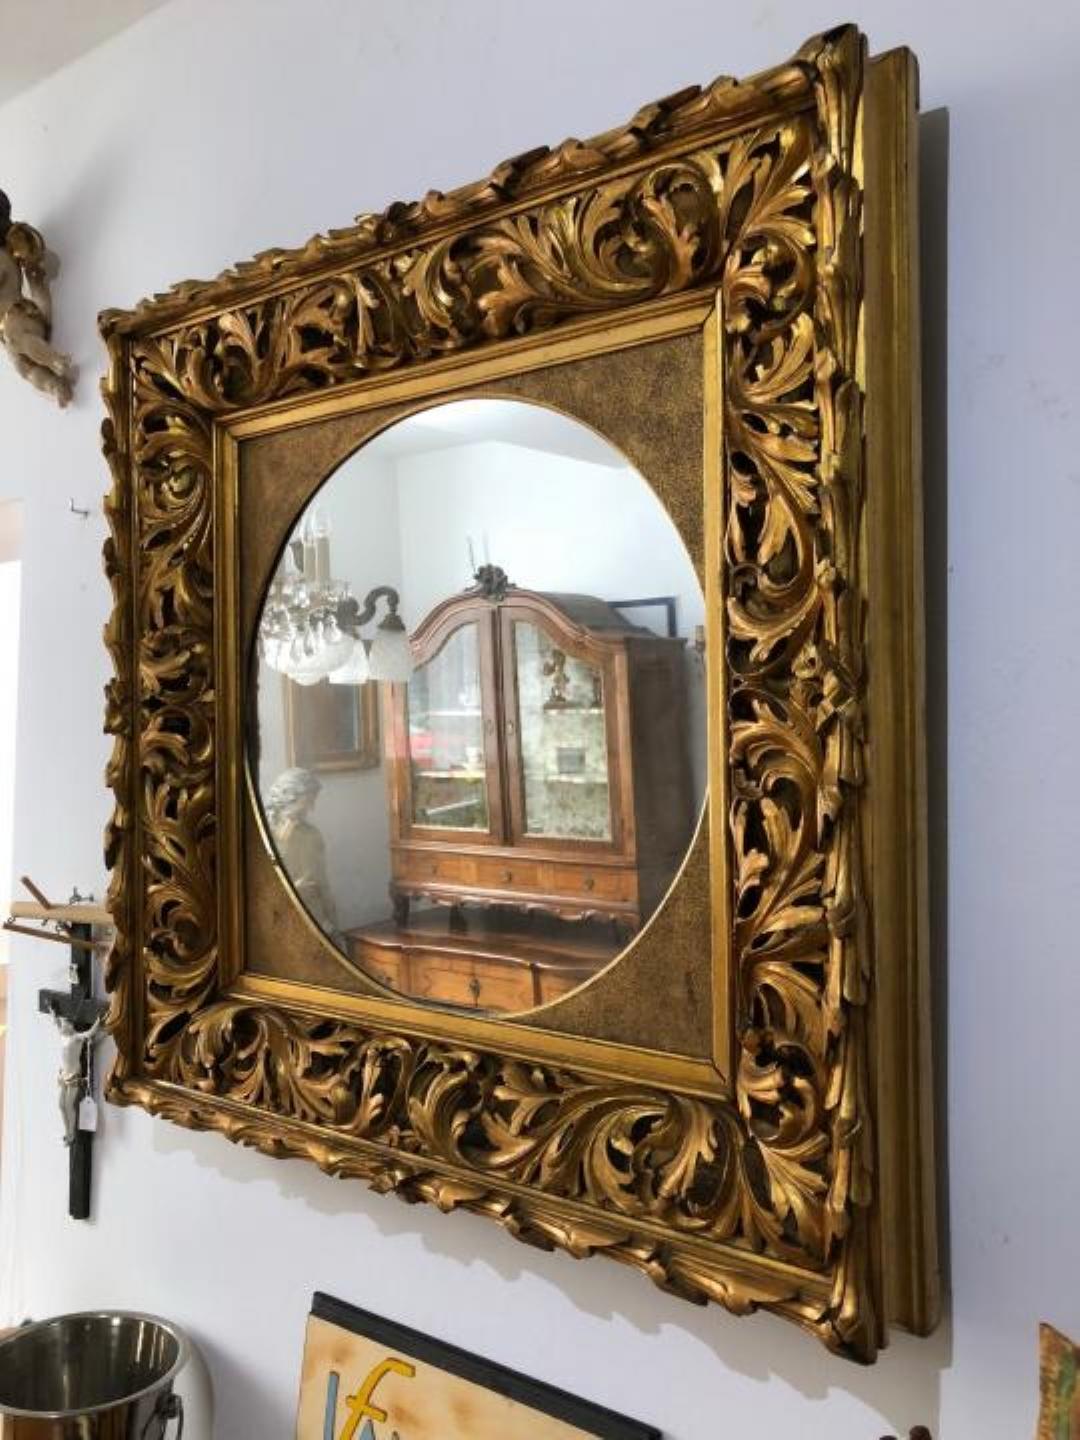 Gilded Florentine wall mirror with acanthus leaf carvings on the frame.
Rare single piece mirror with a square format from Italy.
The frame is in the original gilded condition, this is an original piece
from the period around 1885. It has slight